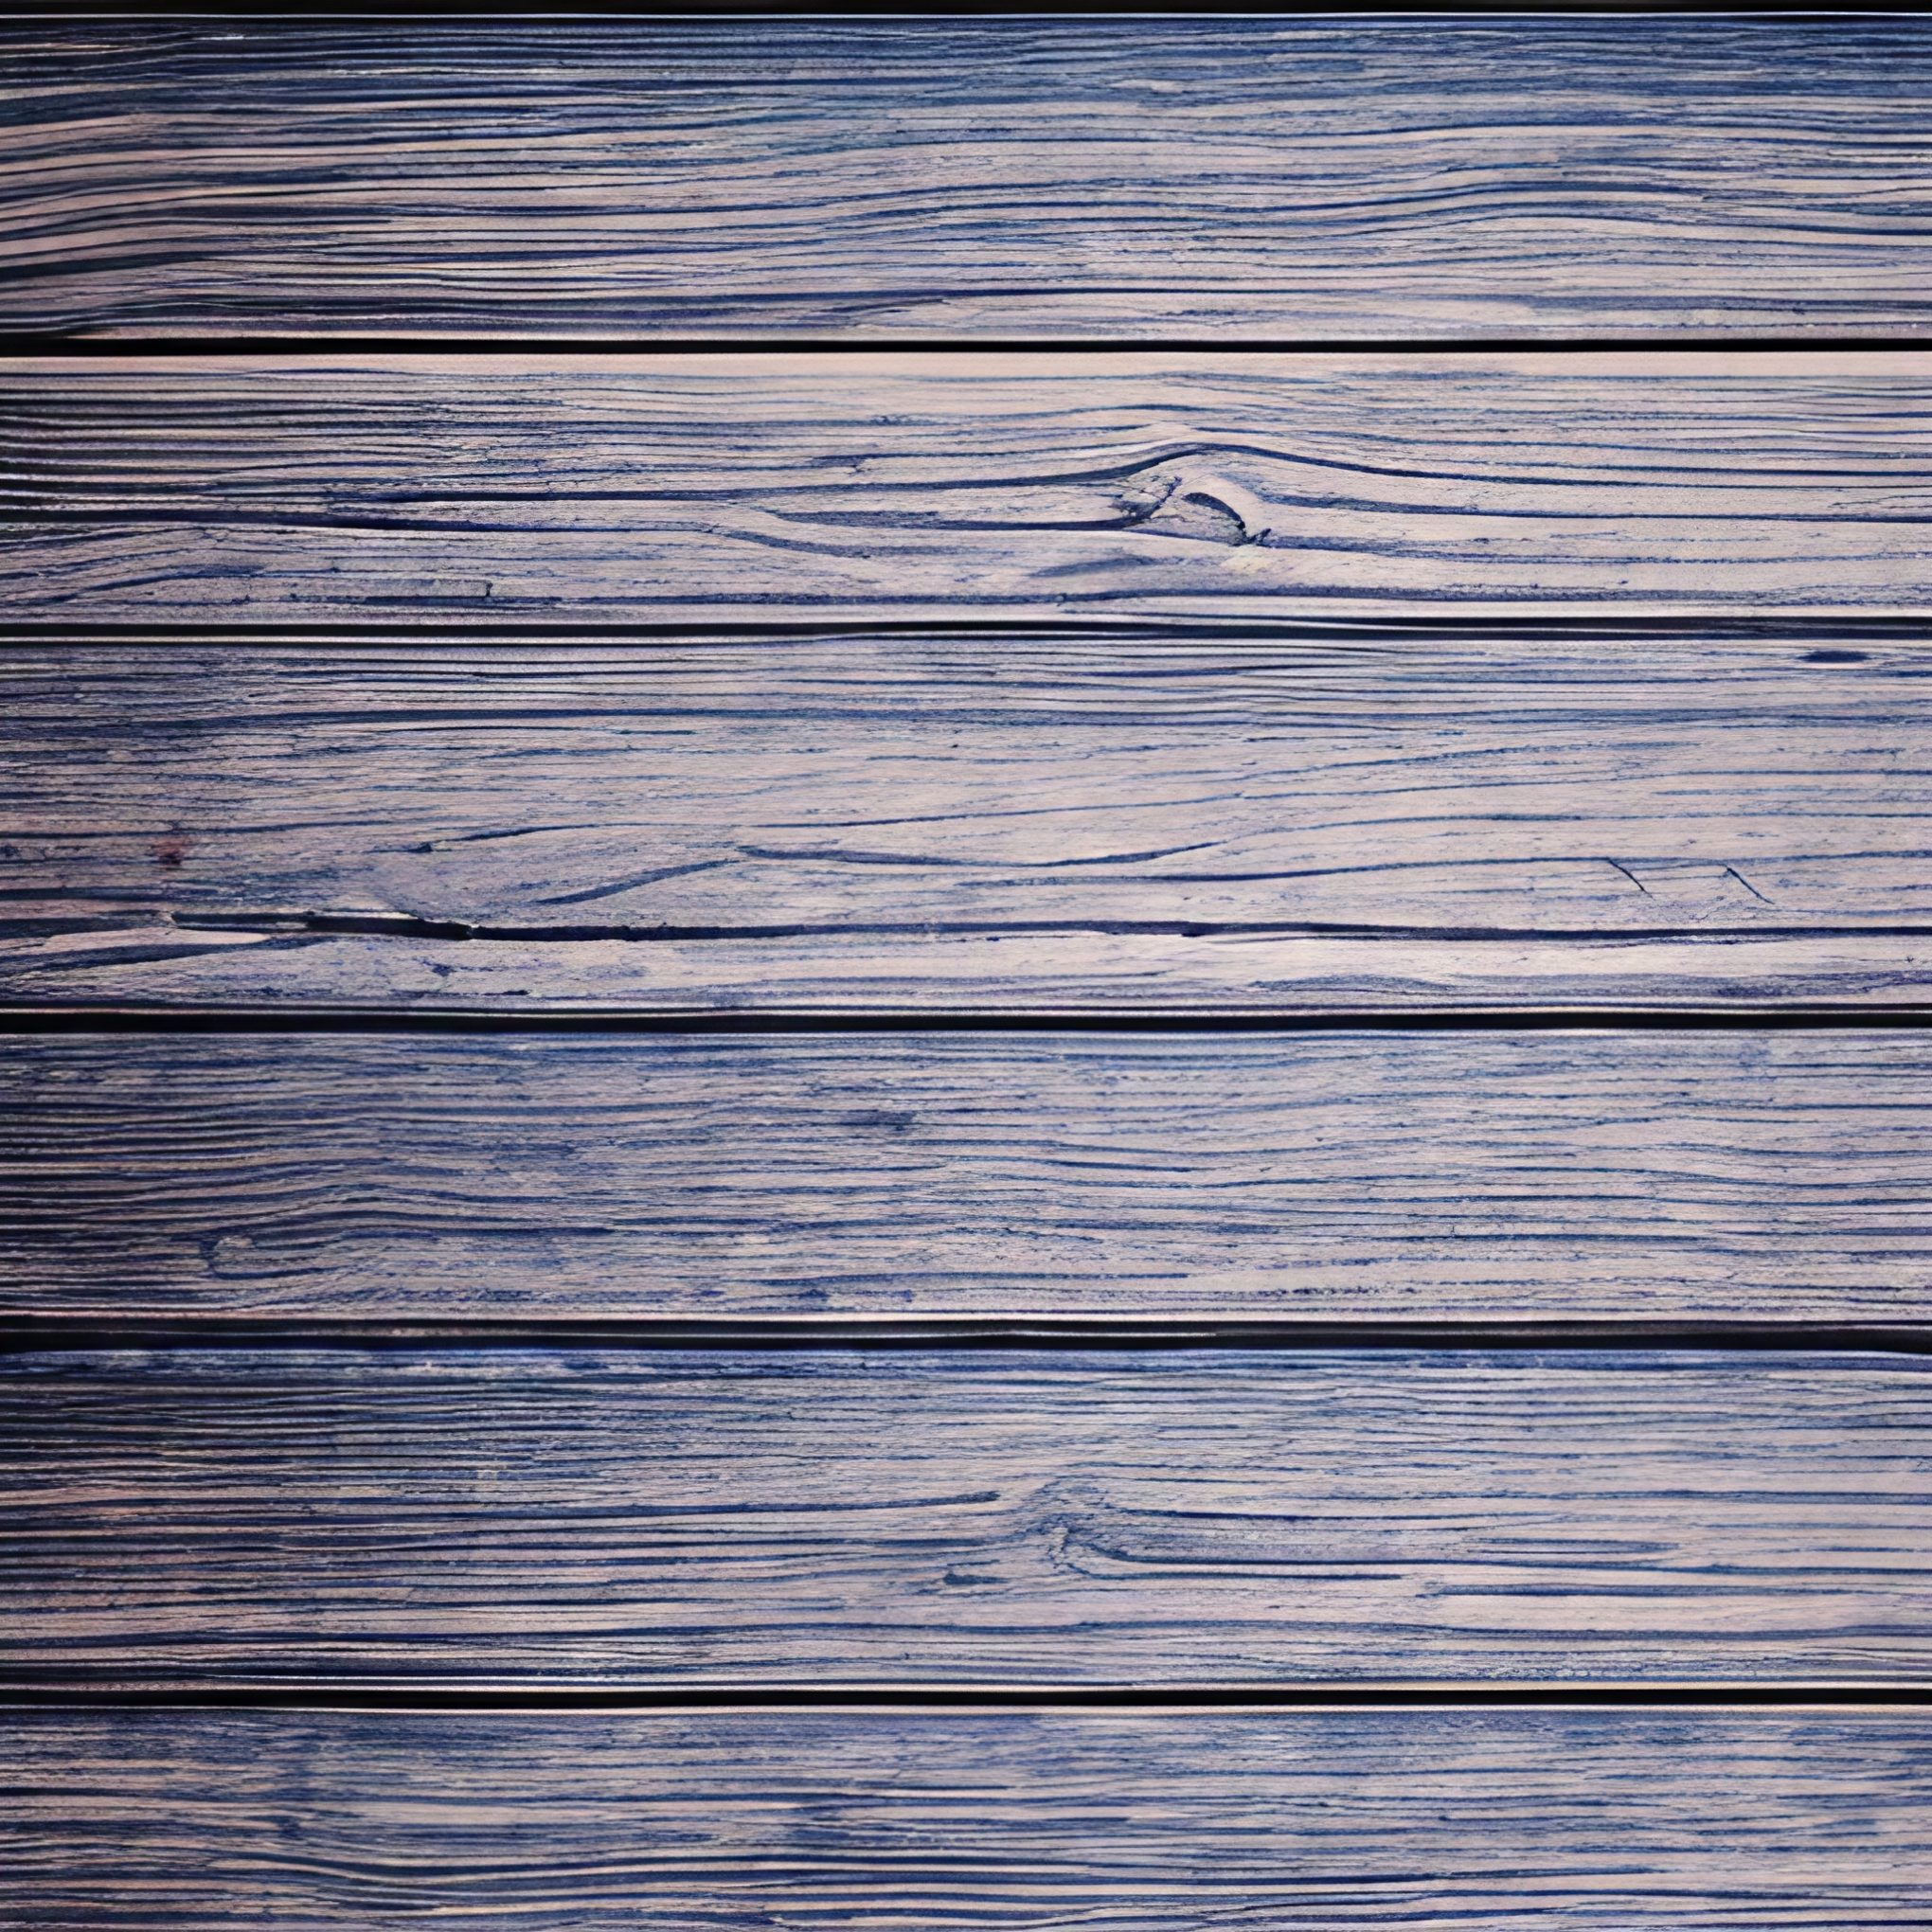 Rustic Blue Painted Wooden Floorboard Planks Free Stock Photo